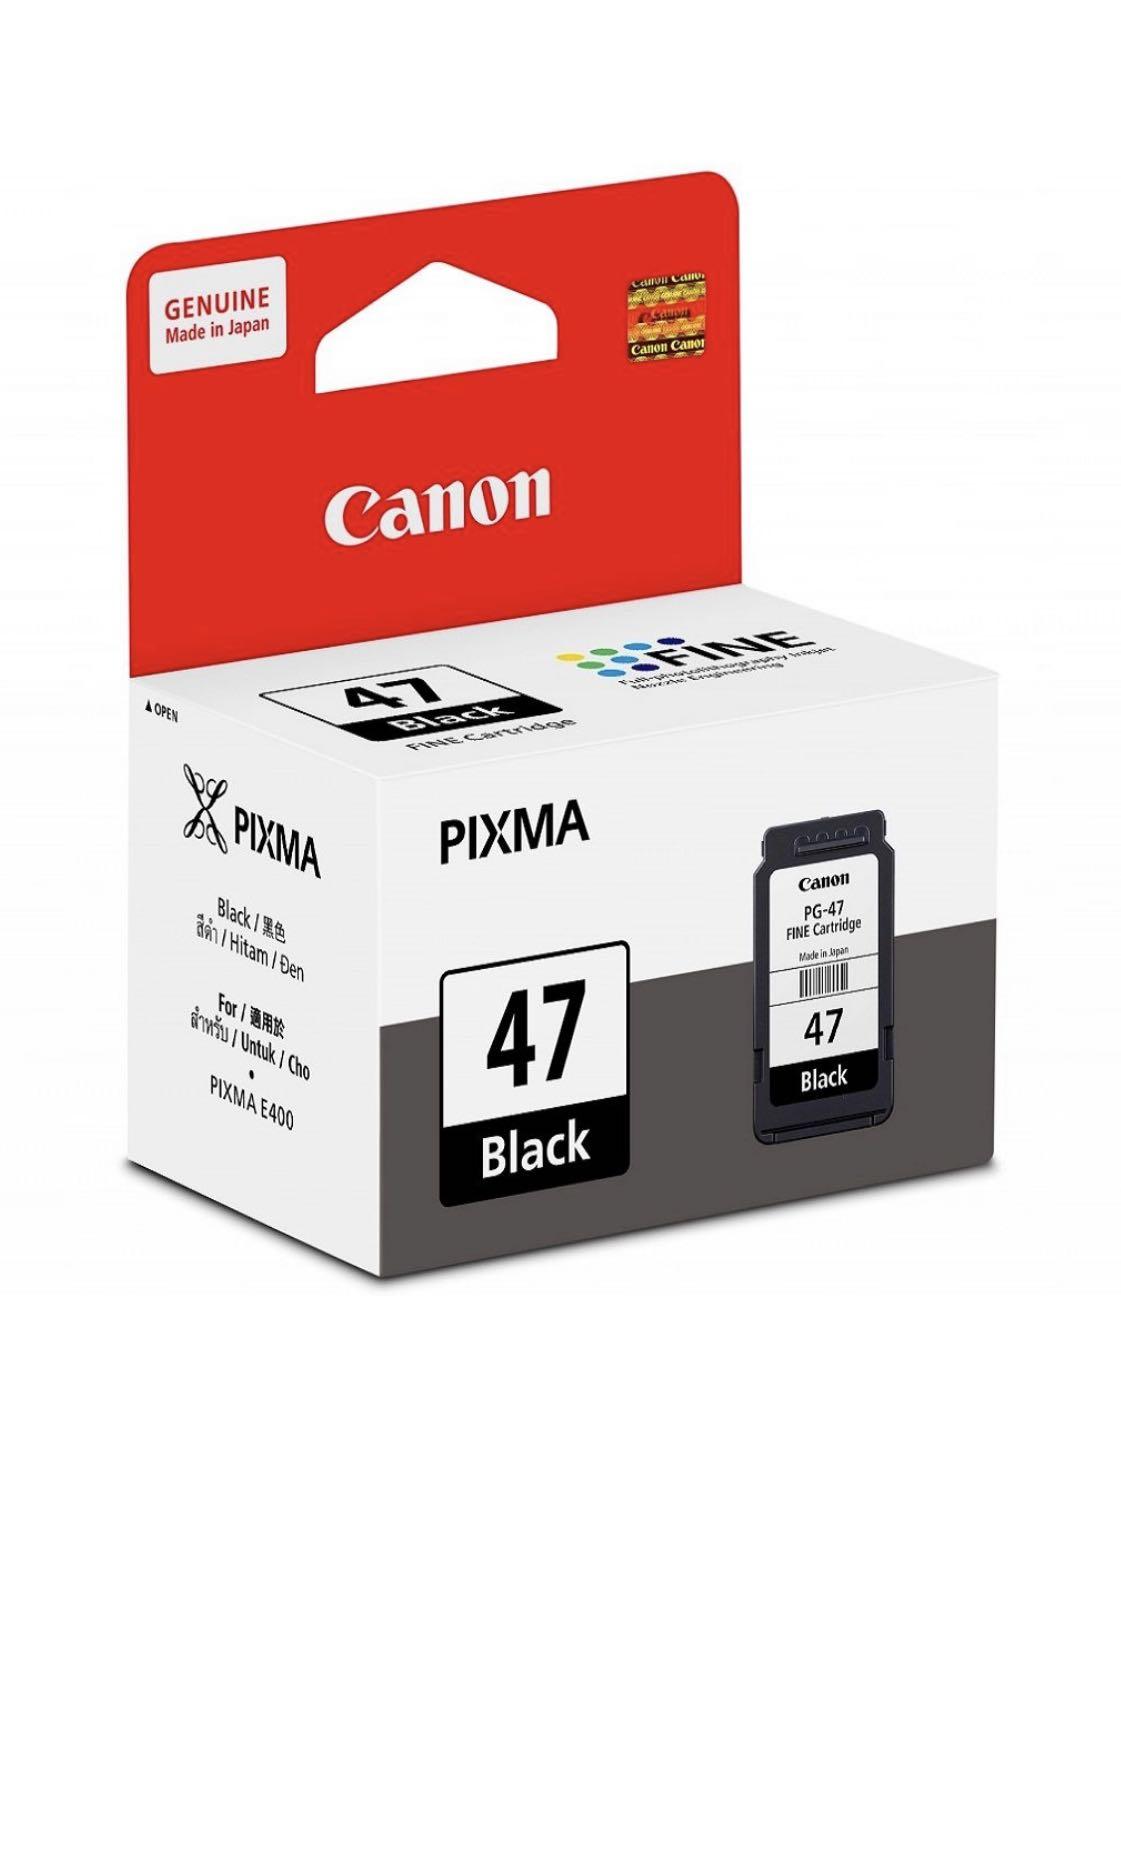 Canon PG-47 Black ink / 57 colour ink, Everything Else on ...